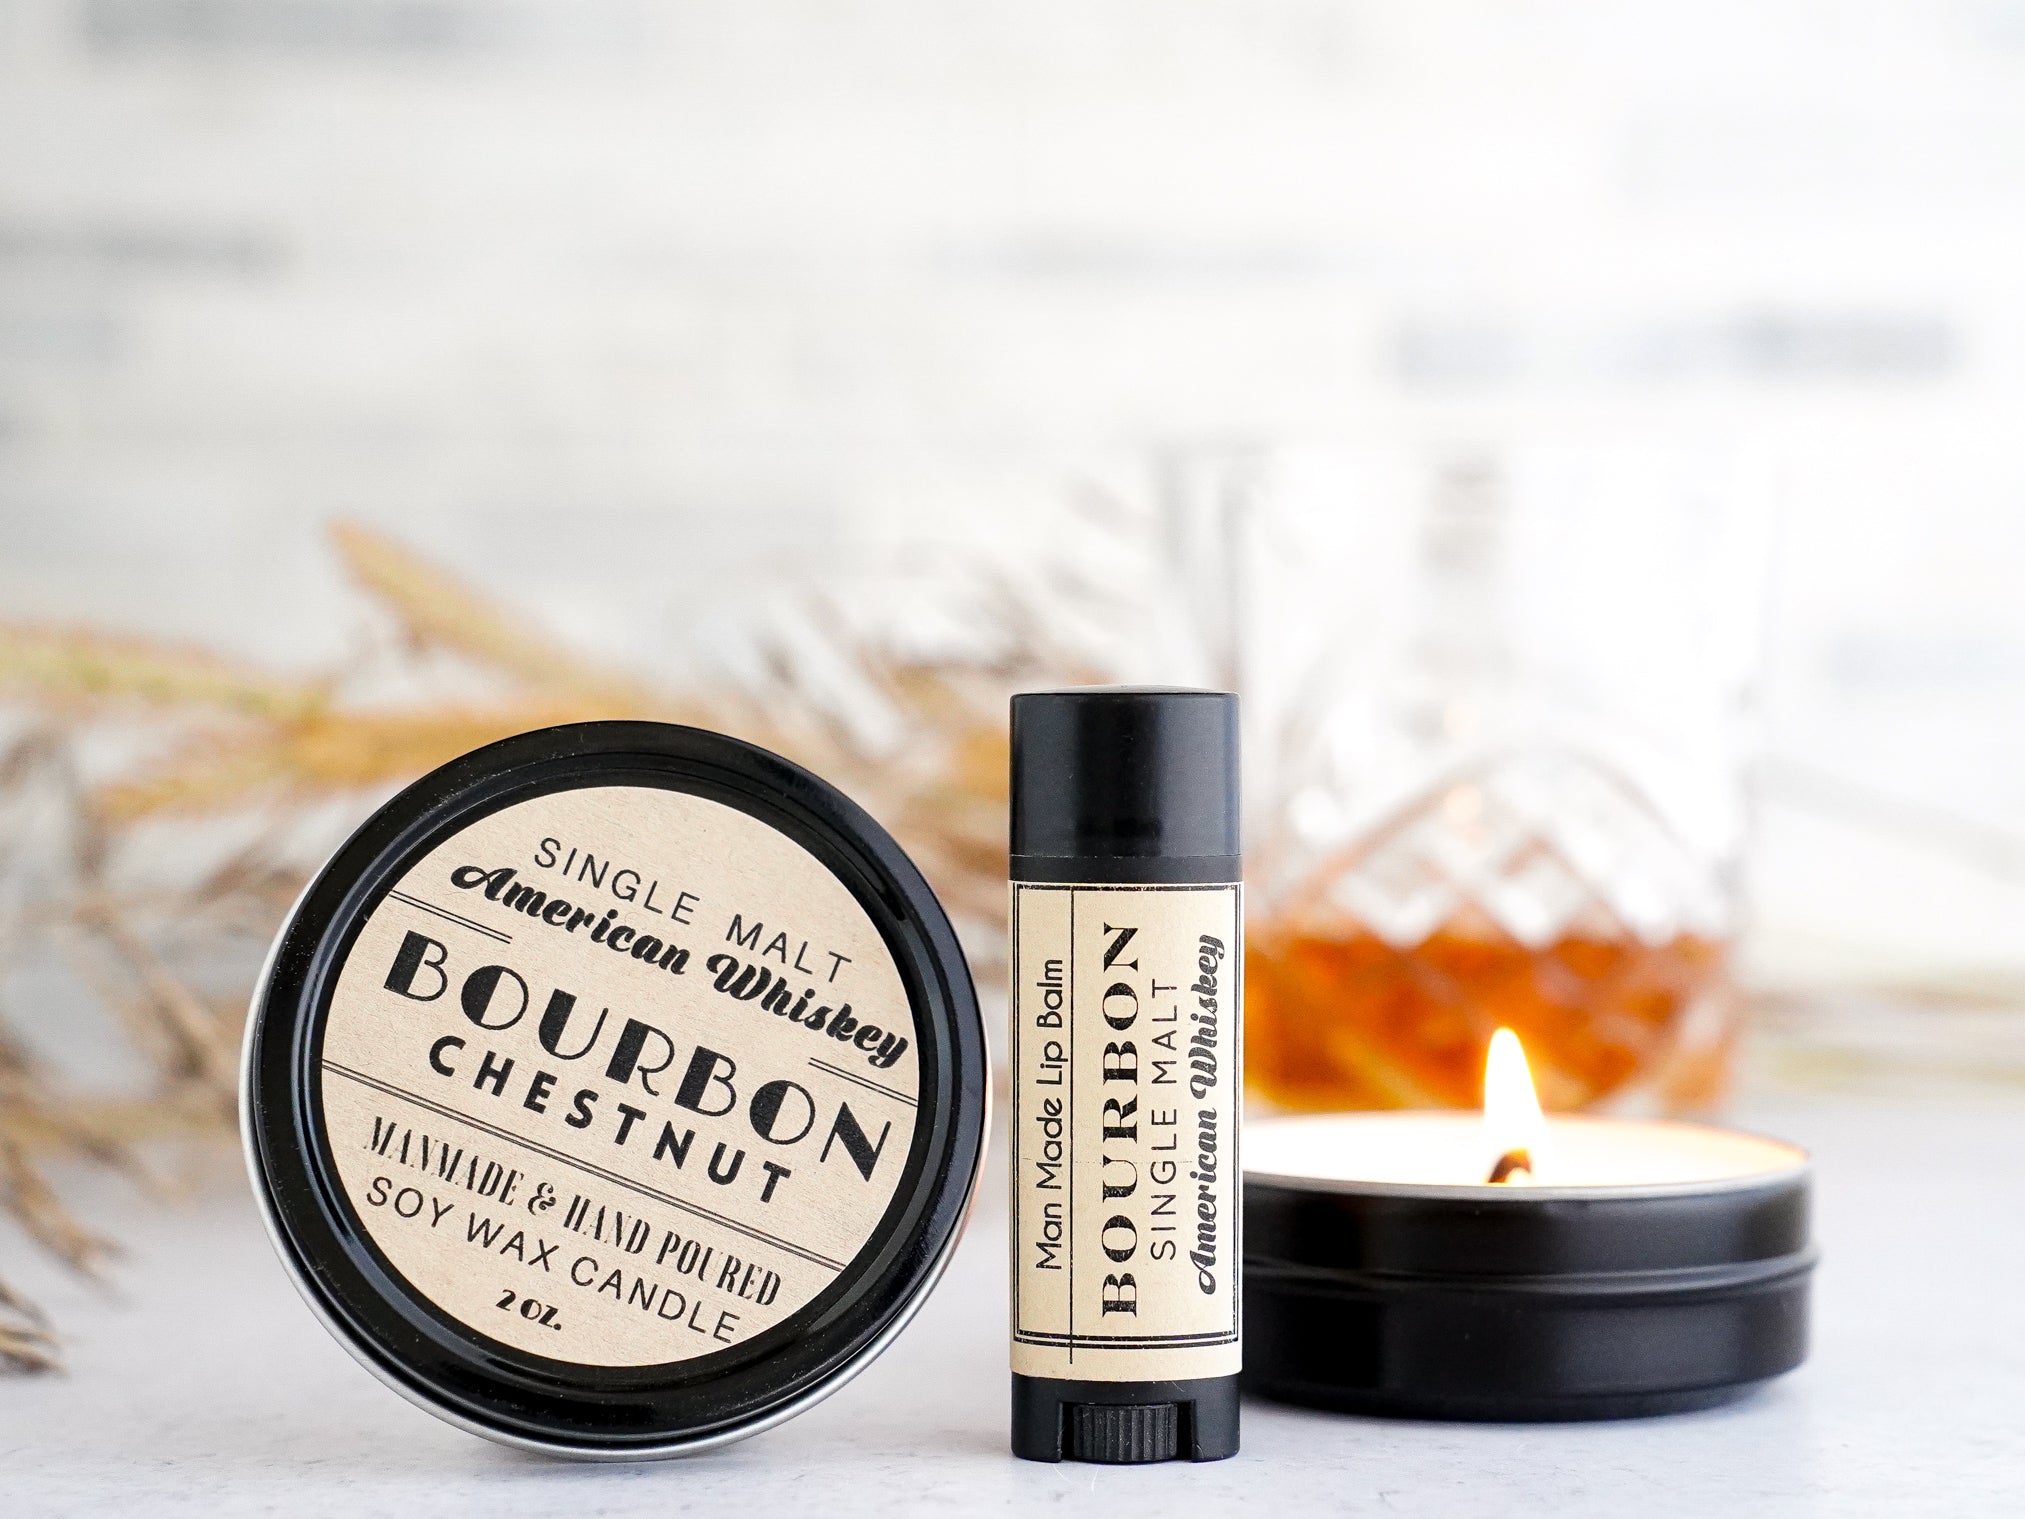 Bourbon Lip Balm - Gifts for Men who have everything - Under 5 dollar -  Funny Bourbon gifts for men unique gifts for Dad